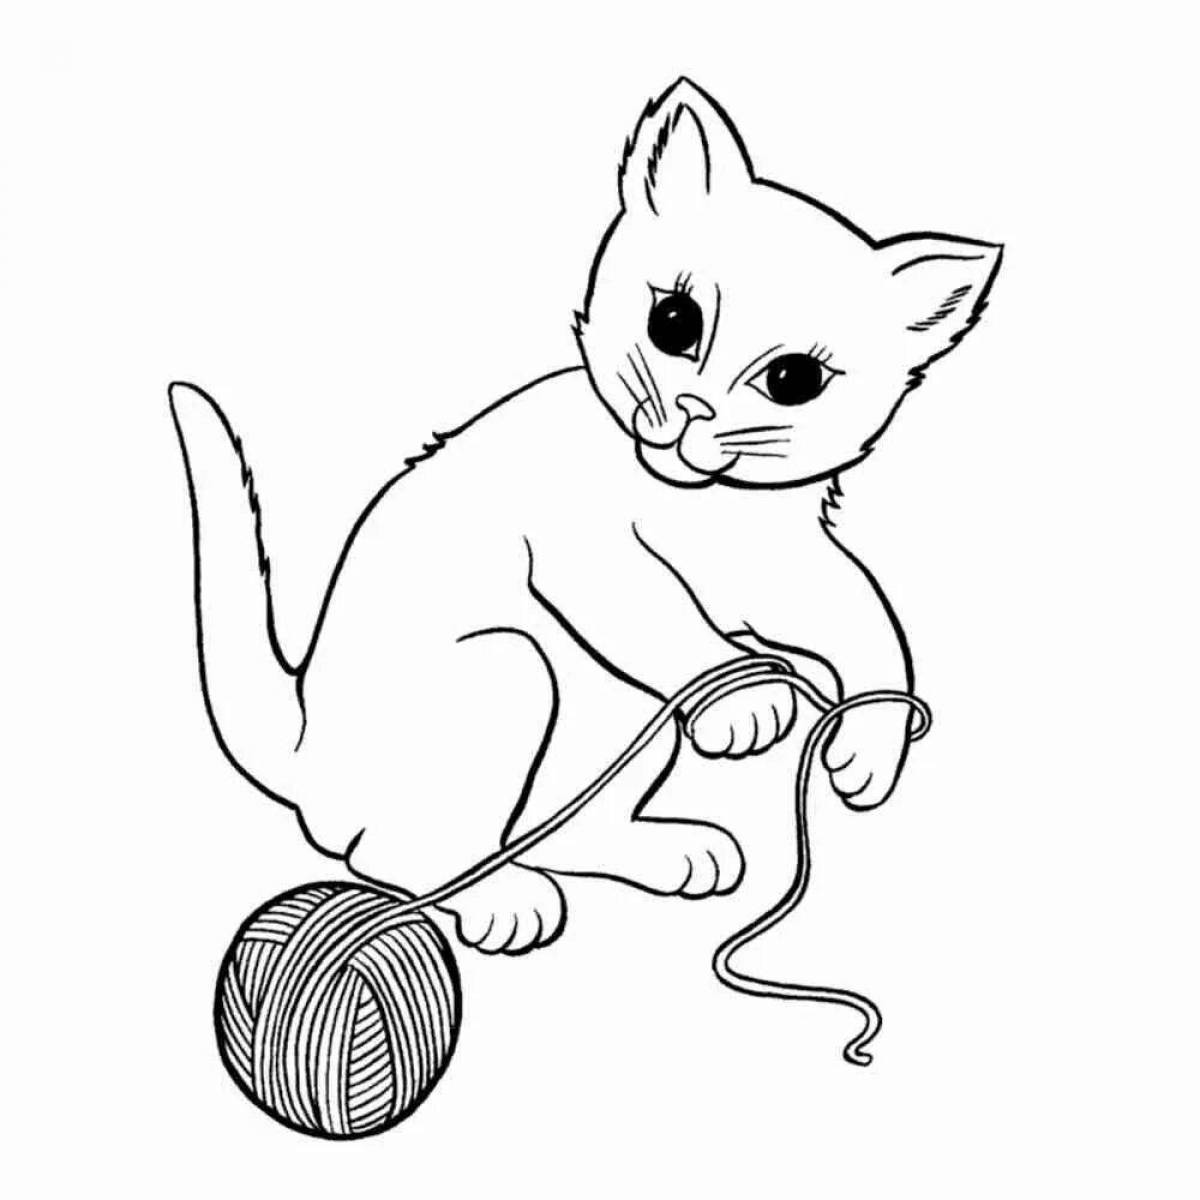 Coloring page affectionate cat